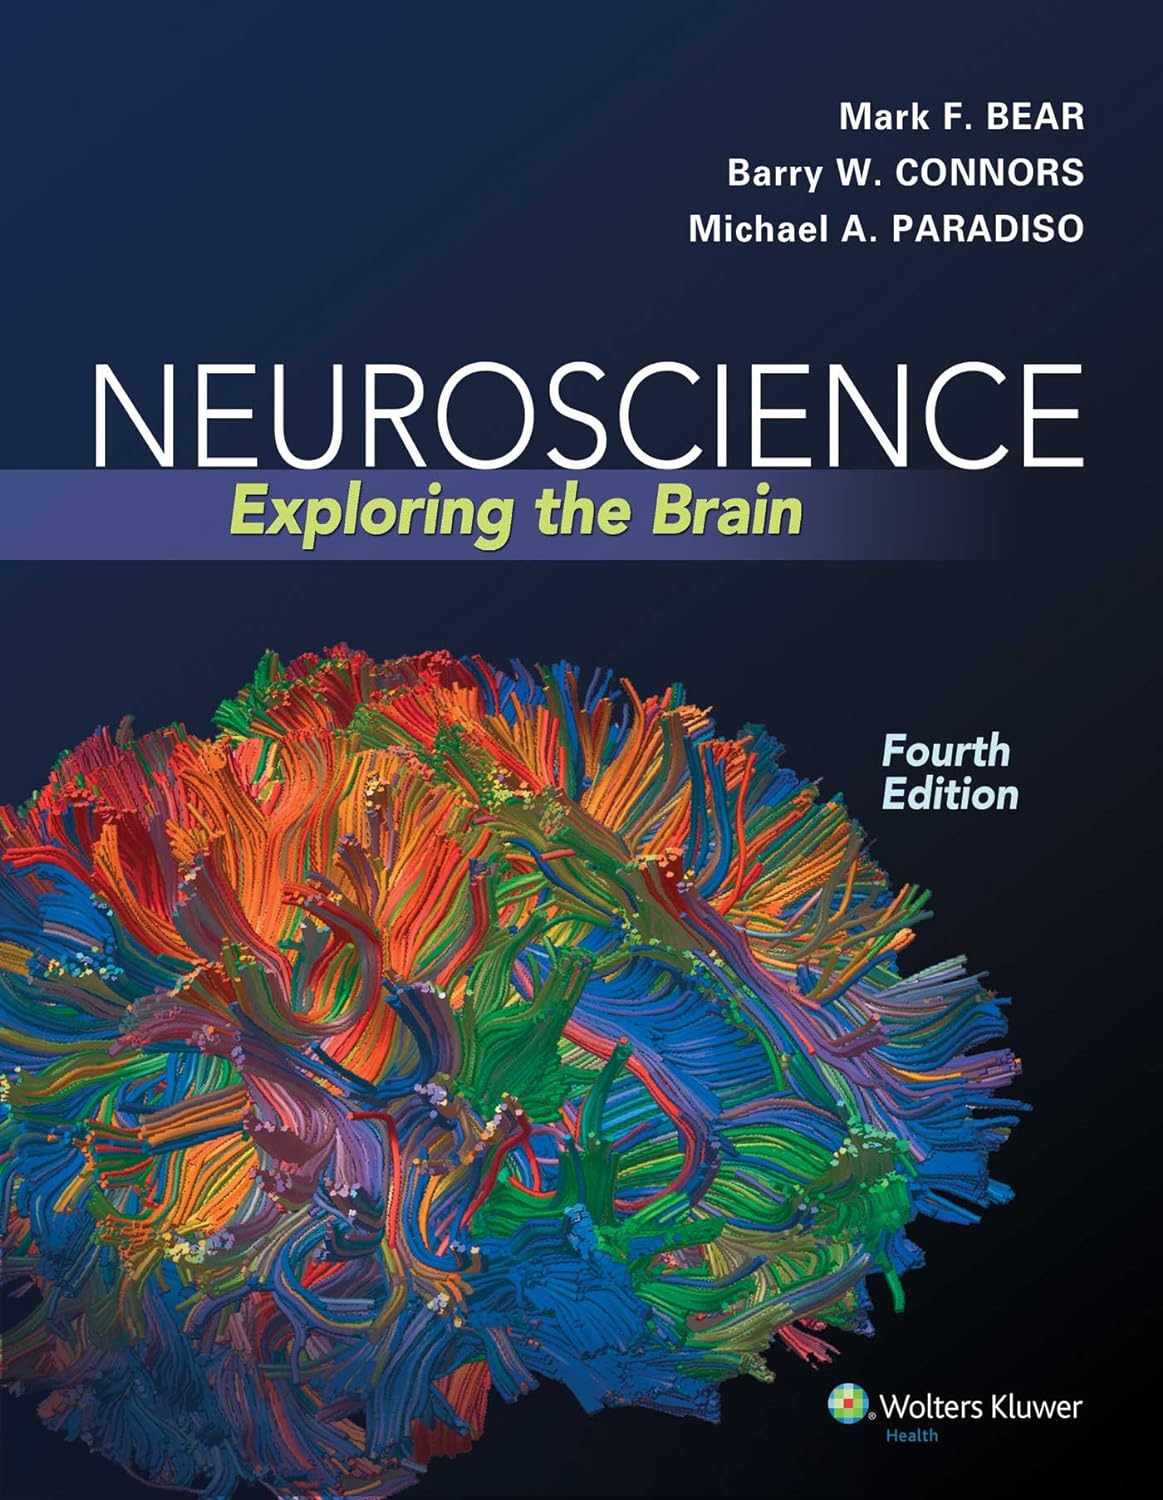 full test bank and practice test questions for Neuroscience Exploring the Brain,Bear,4e